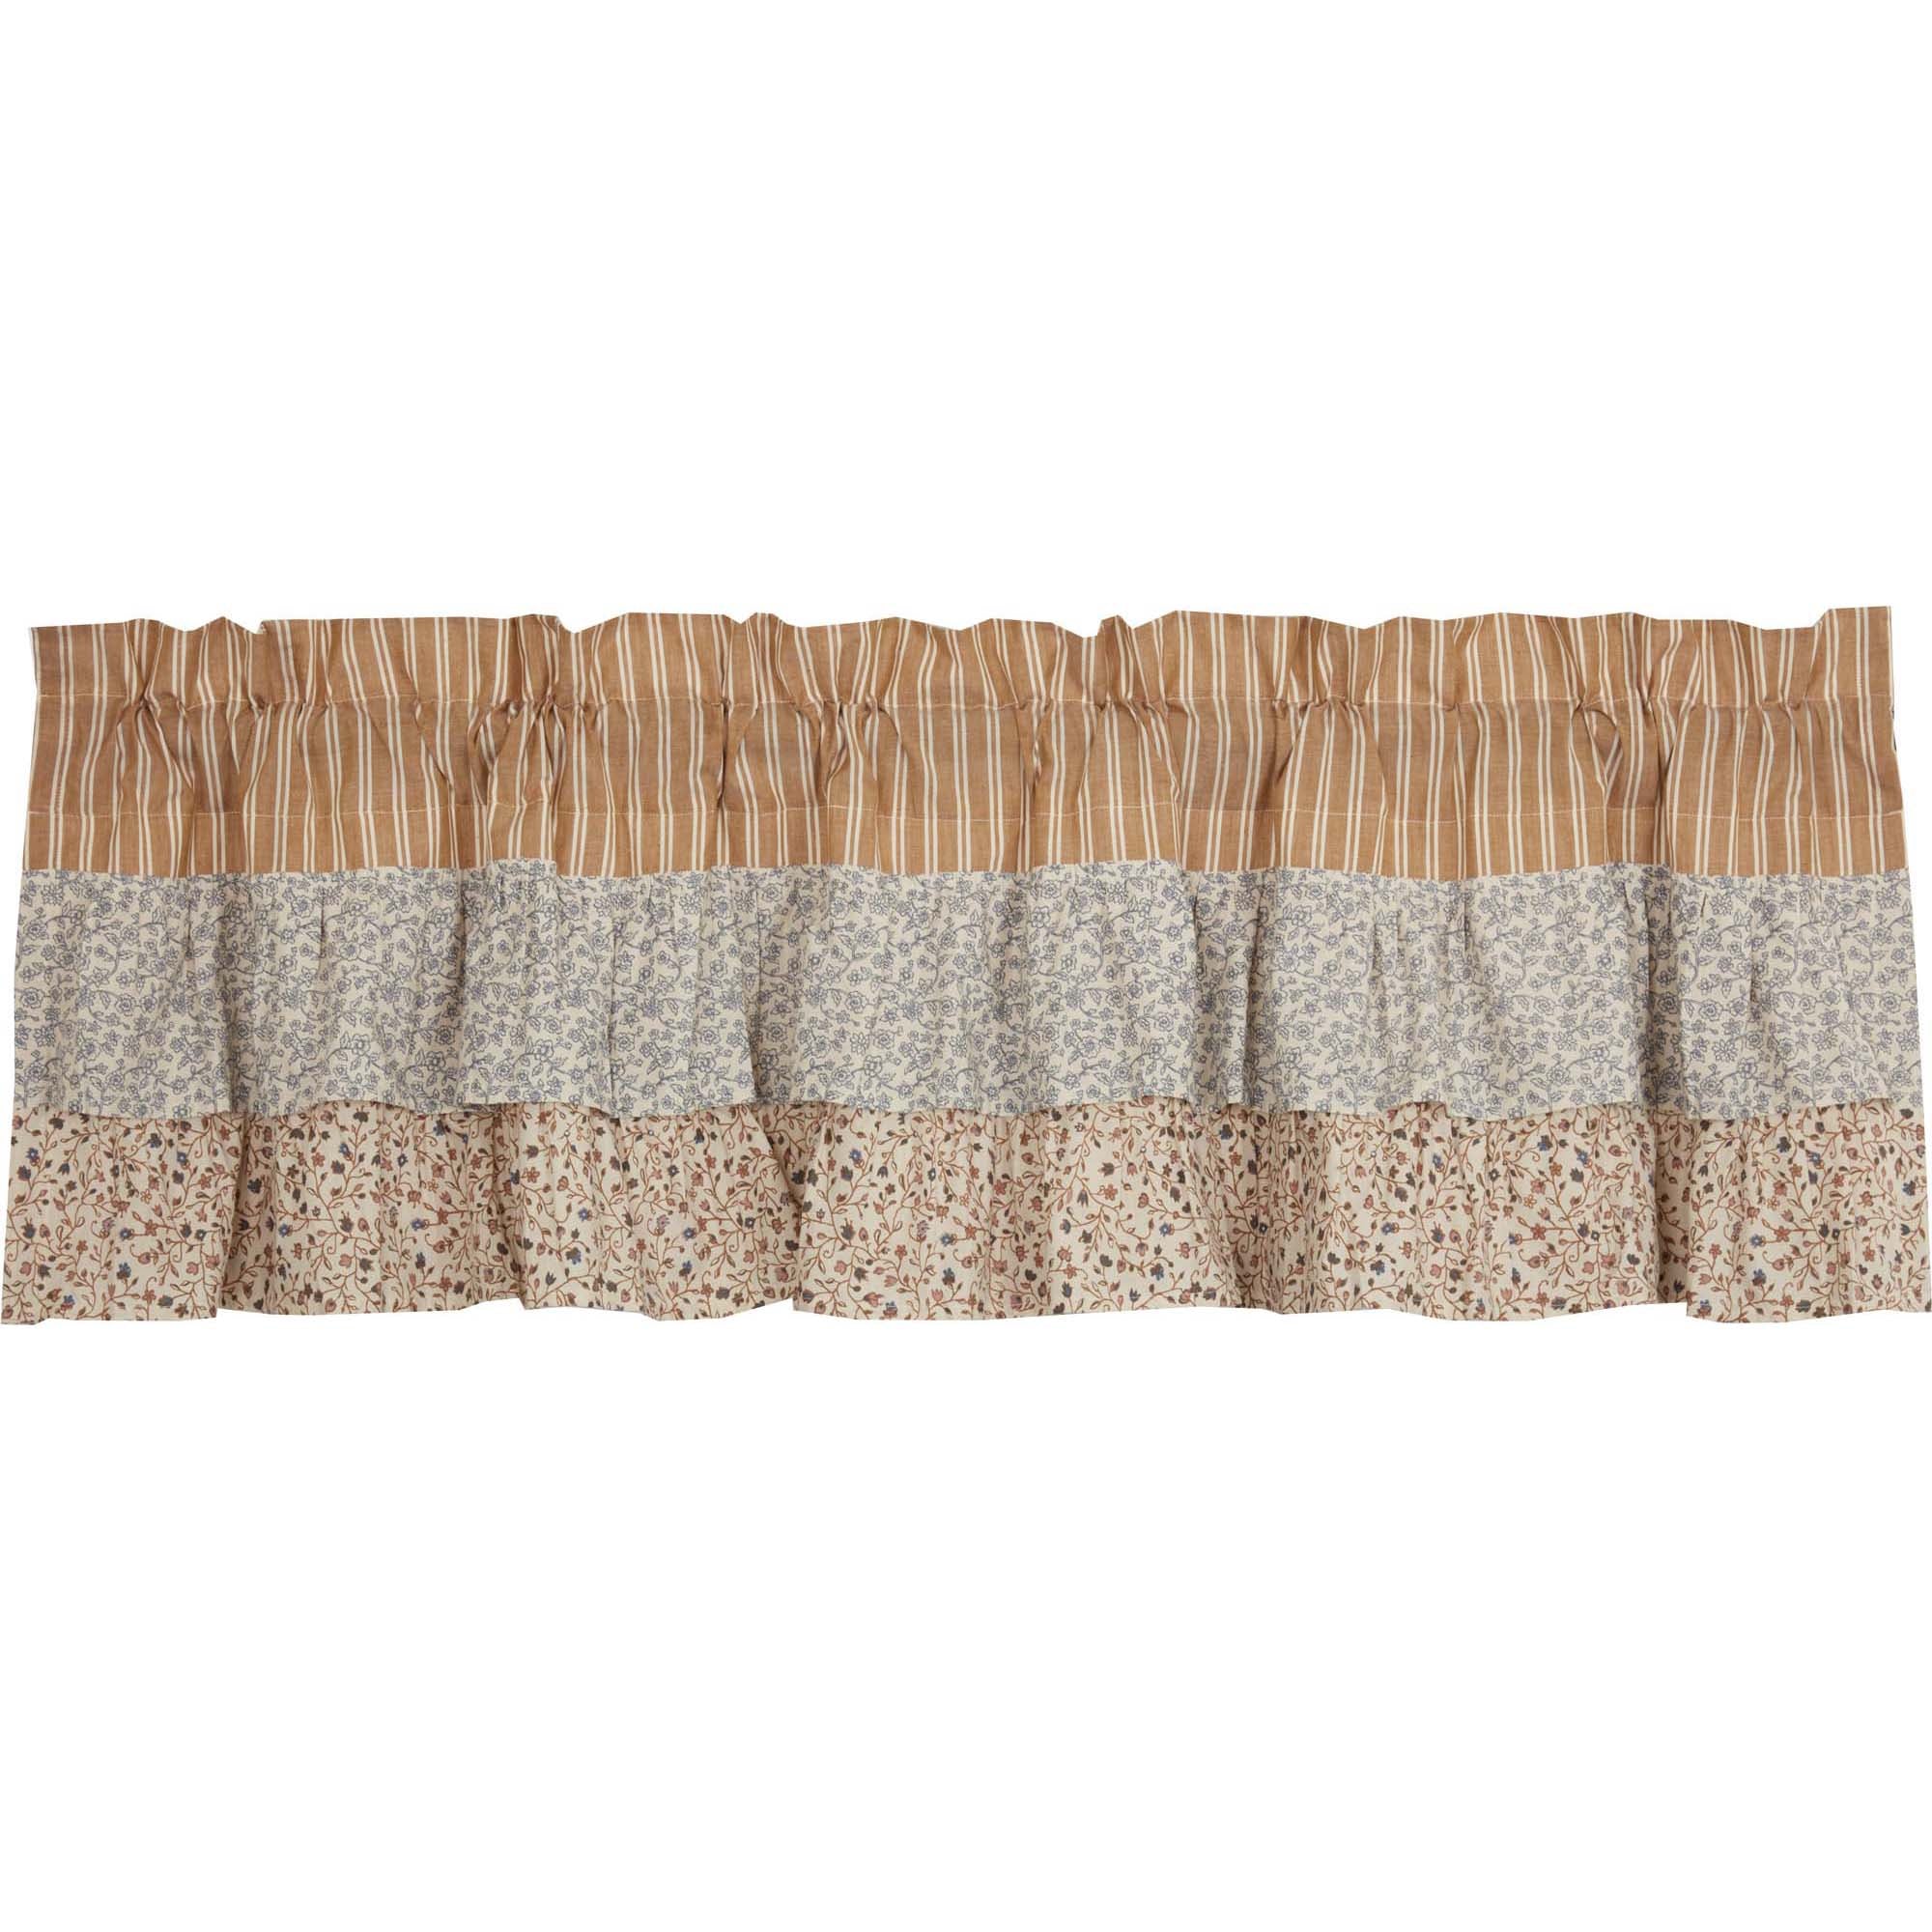 April & Olive Kaila Ticking Gold Ruffled Valance 16x60 By VHC Brands